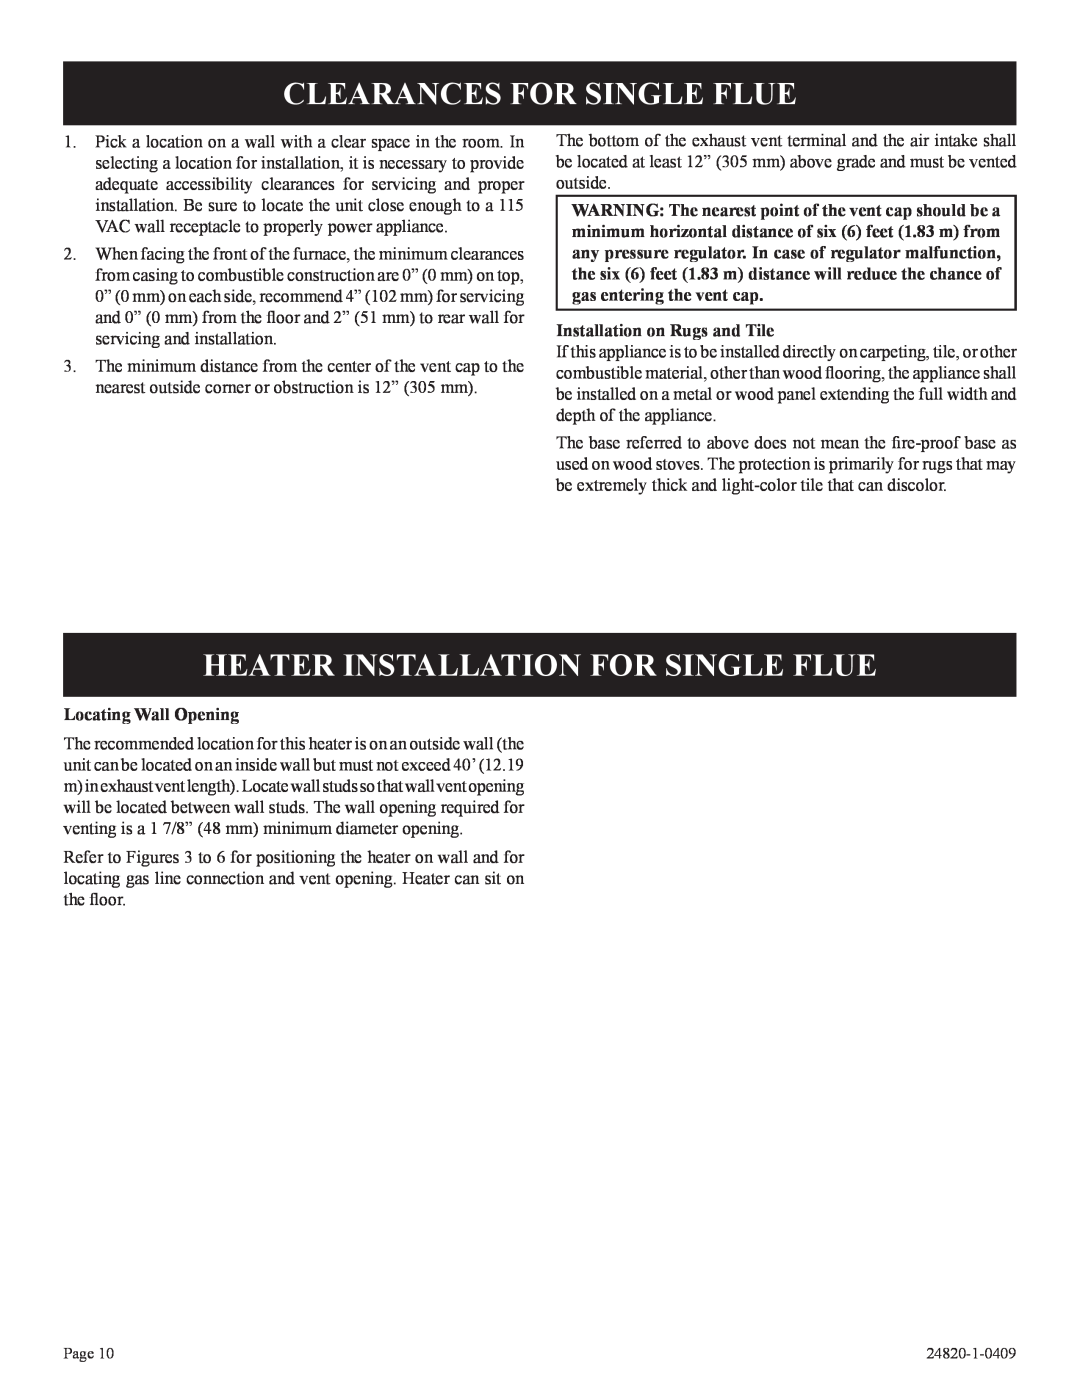 Empire Comfort Systems PV-28SV55-(C,G)2H(N,P)-1 Clearances For Single Flue, Heater Installation For Single Flue 